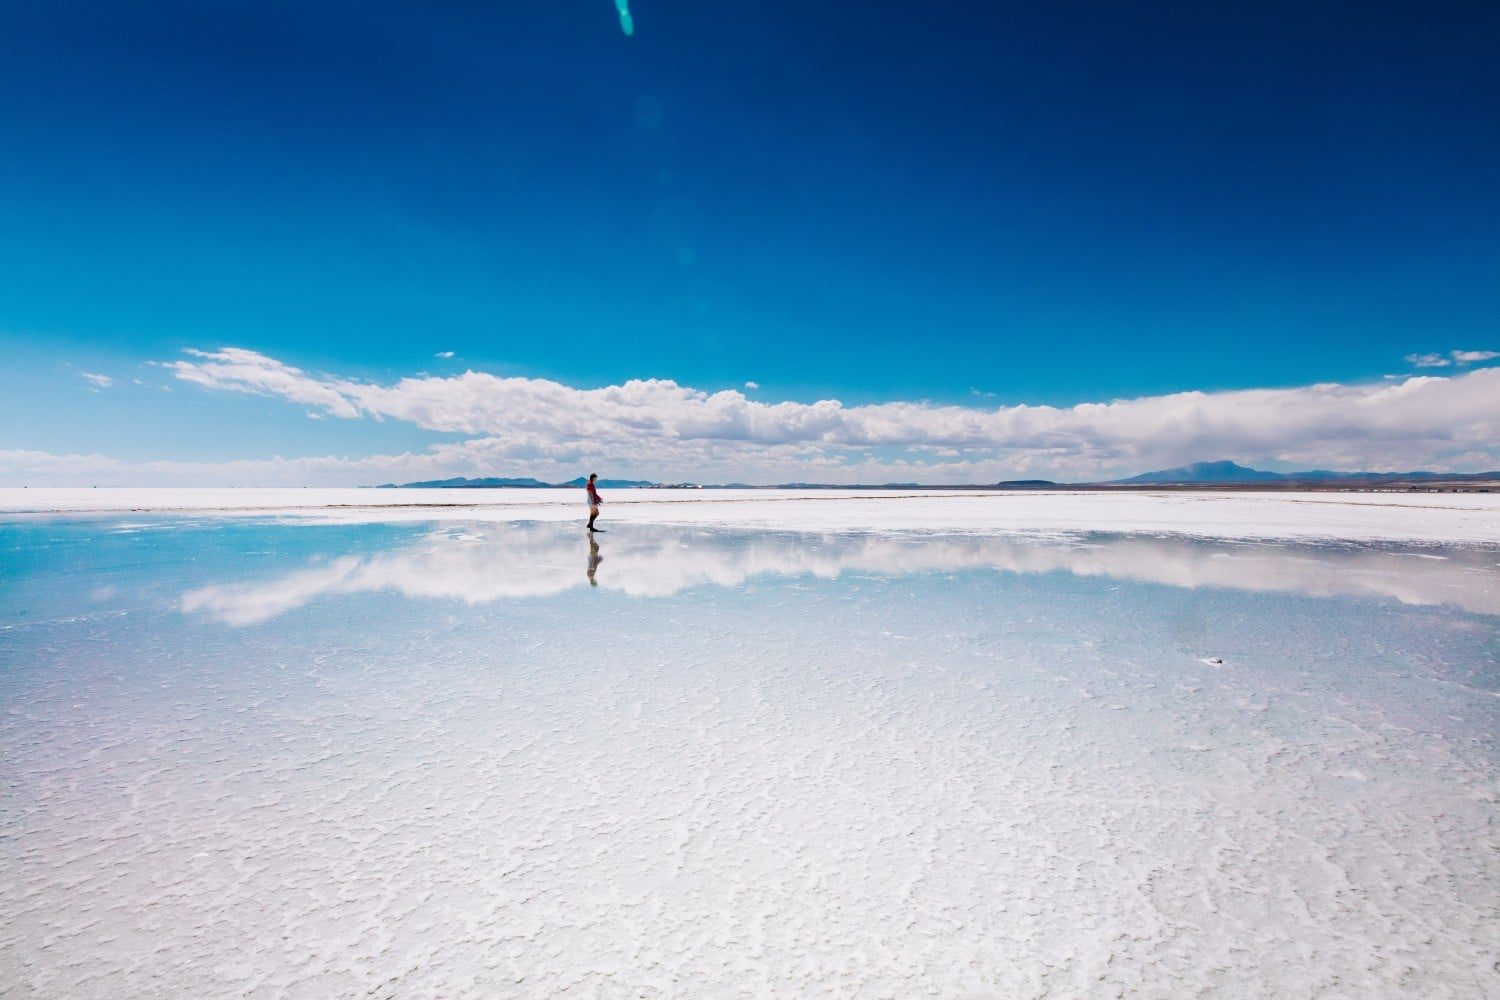 The best time to visit the Salar de Uyuni is during the rainy season